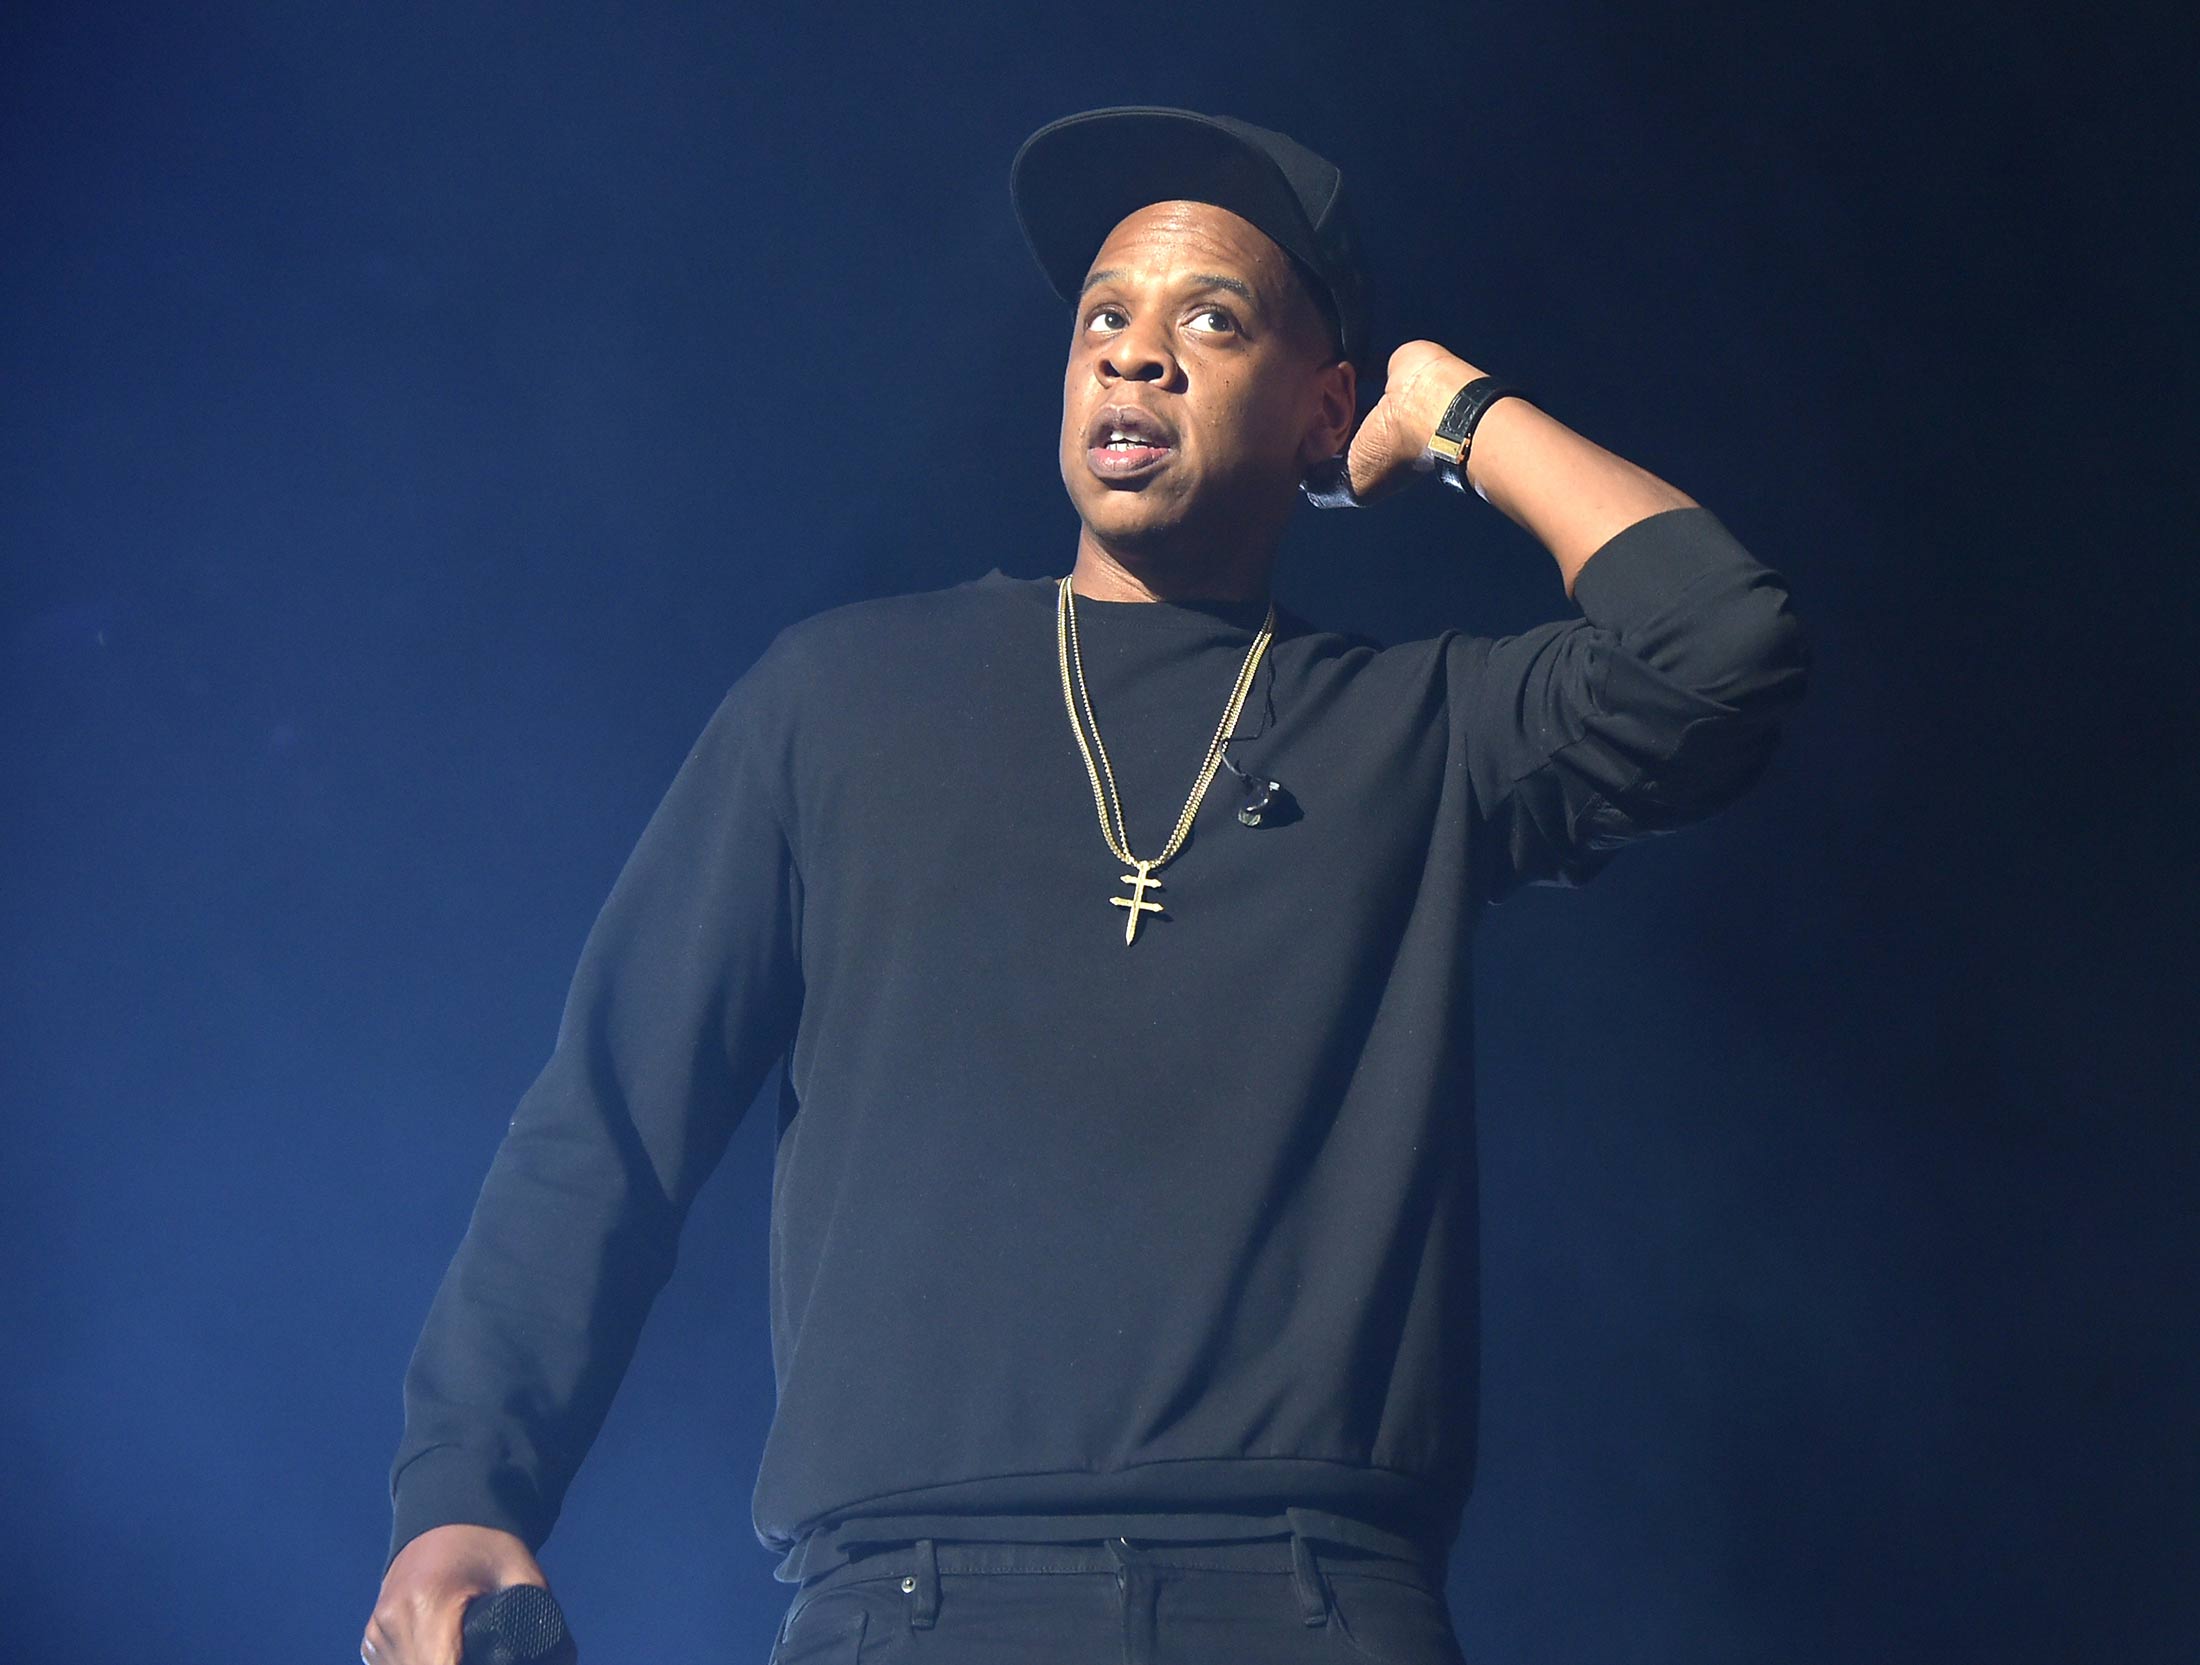 Jay-Z performs onstage  during TIDAL X: 1020 Amplified by HTC at the Barclays Center in Brooklyn on Oct. 20, 2015.
